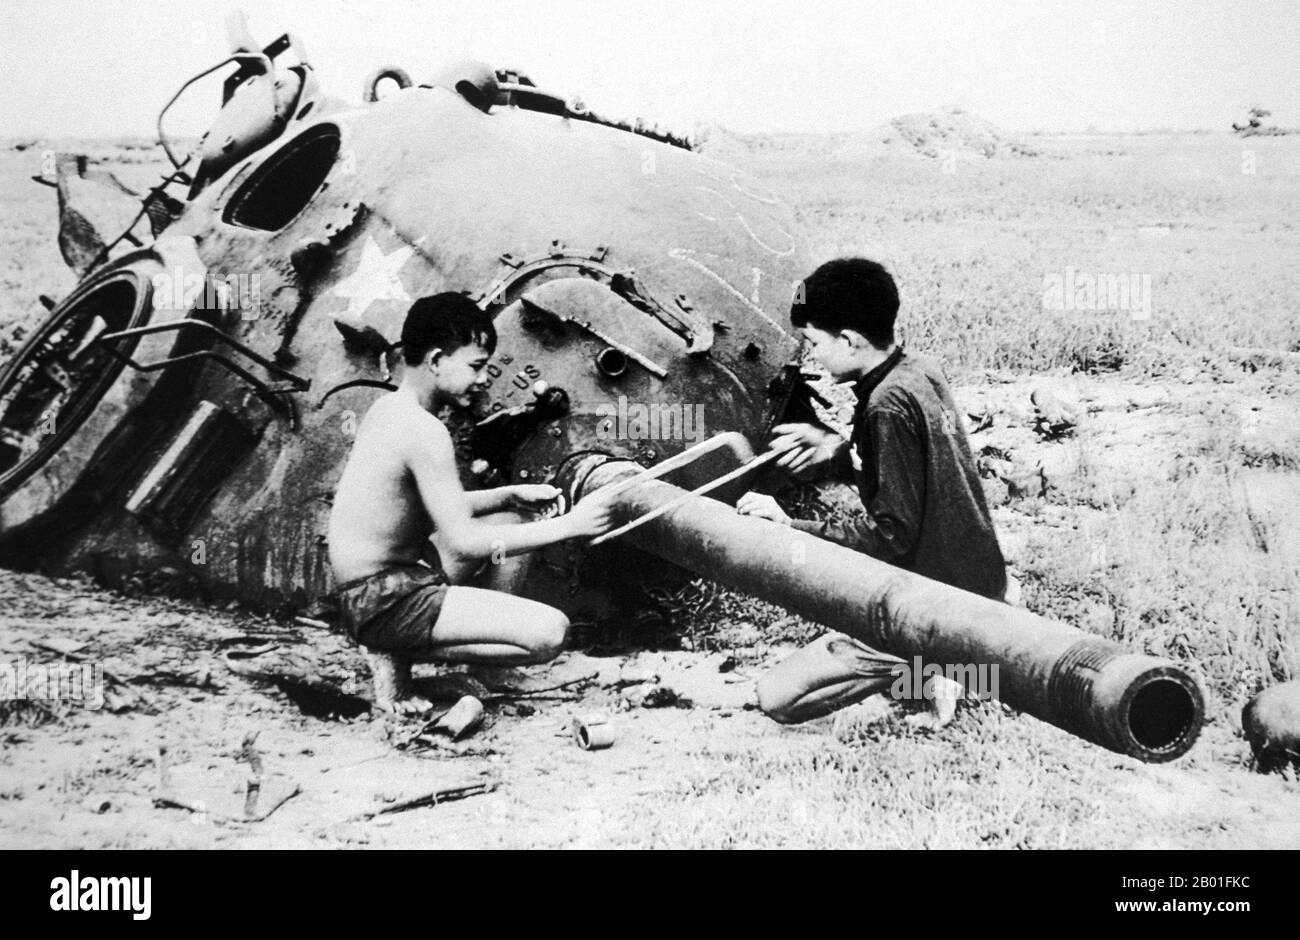 Vietnam: NLF children sawing barrel off destroyed US tank, Cu Chi, 1968.  The Second Indochina War, known in America as the Vietnam War, was a Cold War era military conflict that occurred in Vietnam, Laos, and Cambodia from 1 November 1955 to the fall of Saigon on 30 April 1975. This war followed the First Indochina War and was fought between North Vietnam, supported by its communist allies, and the government of South Vietnam, supported by the U.S. and other anti-communist nations. The U.S. government viewed involvement in the war as a way to prevent a communist takeover of South Vietnam. Stock Photo